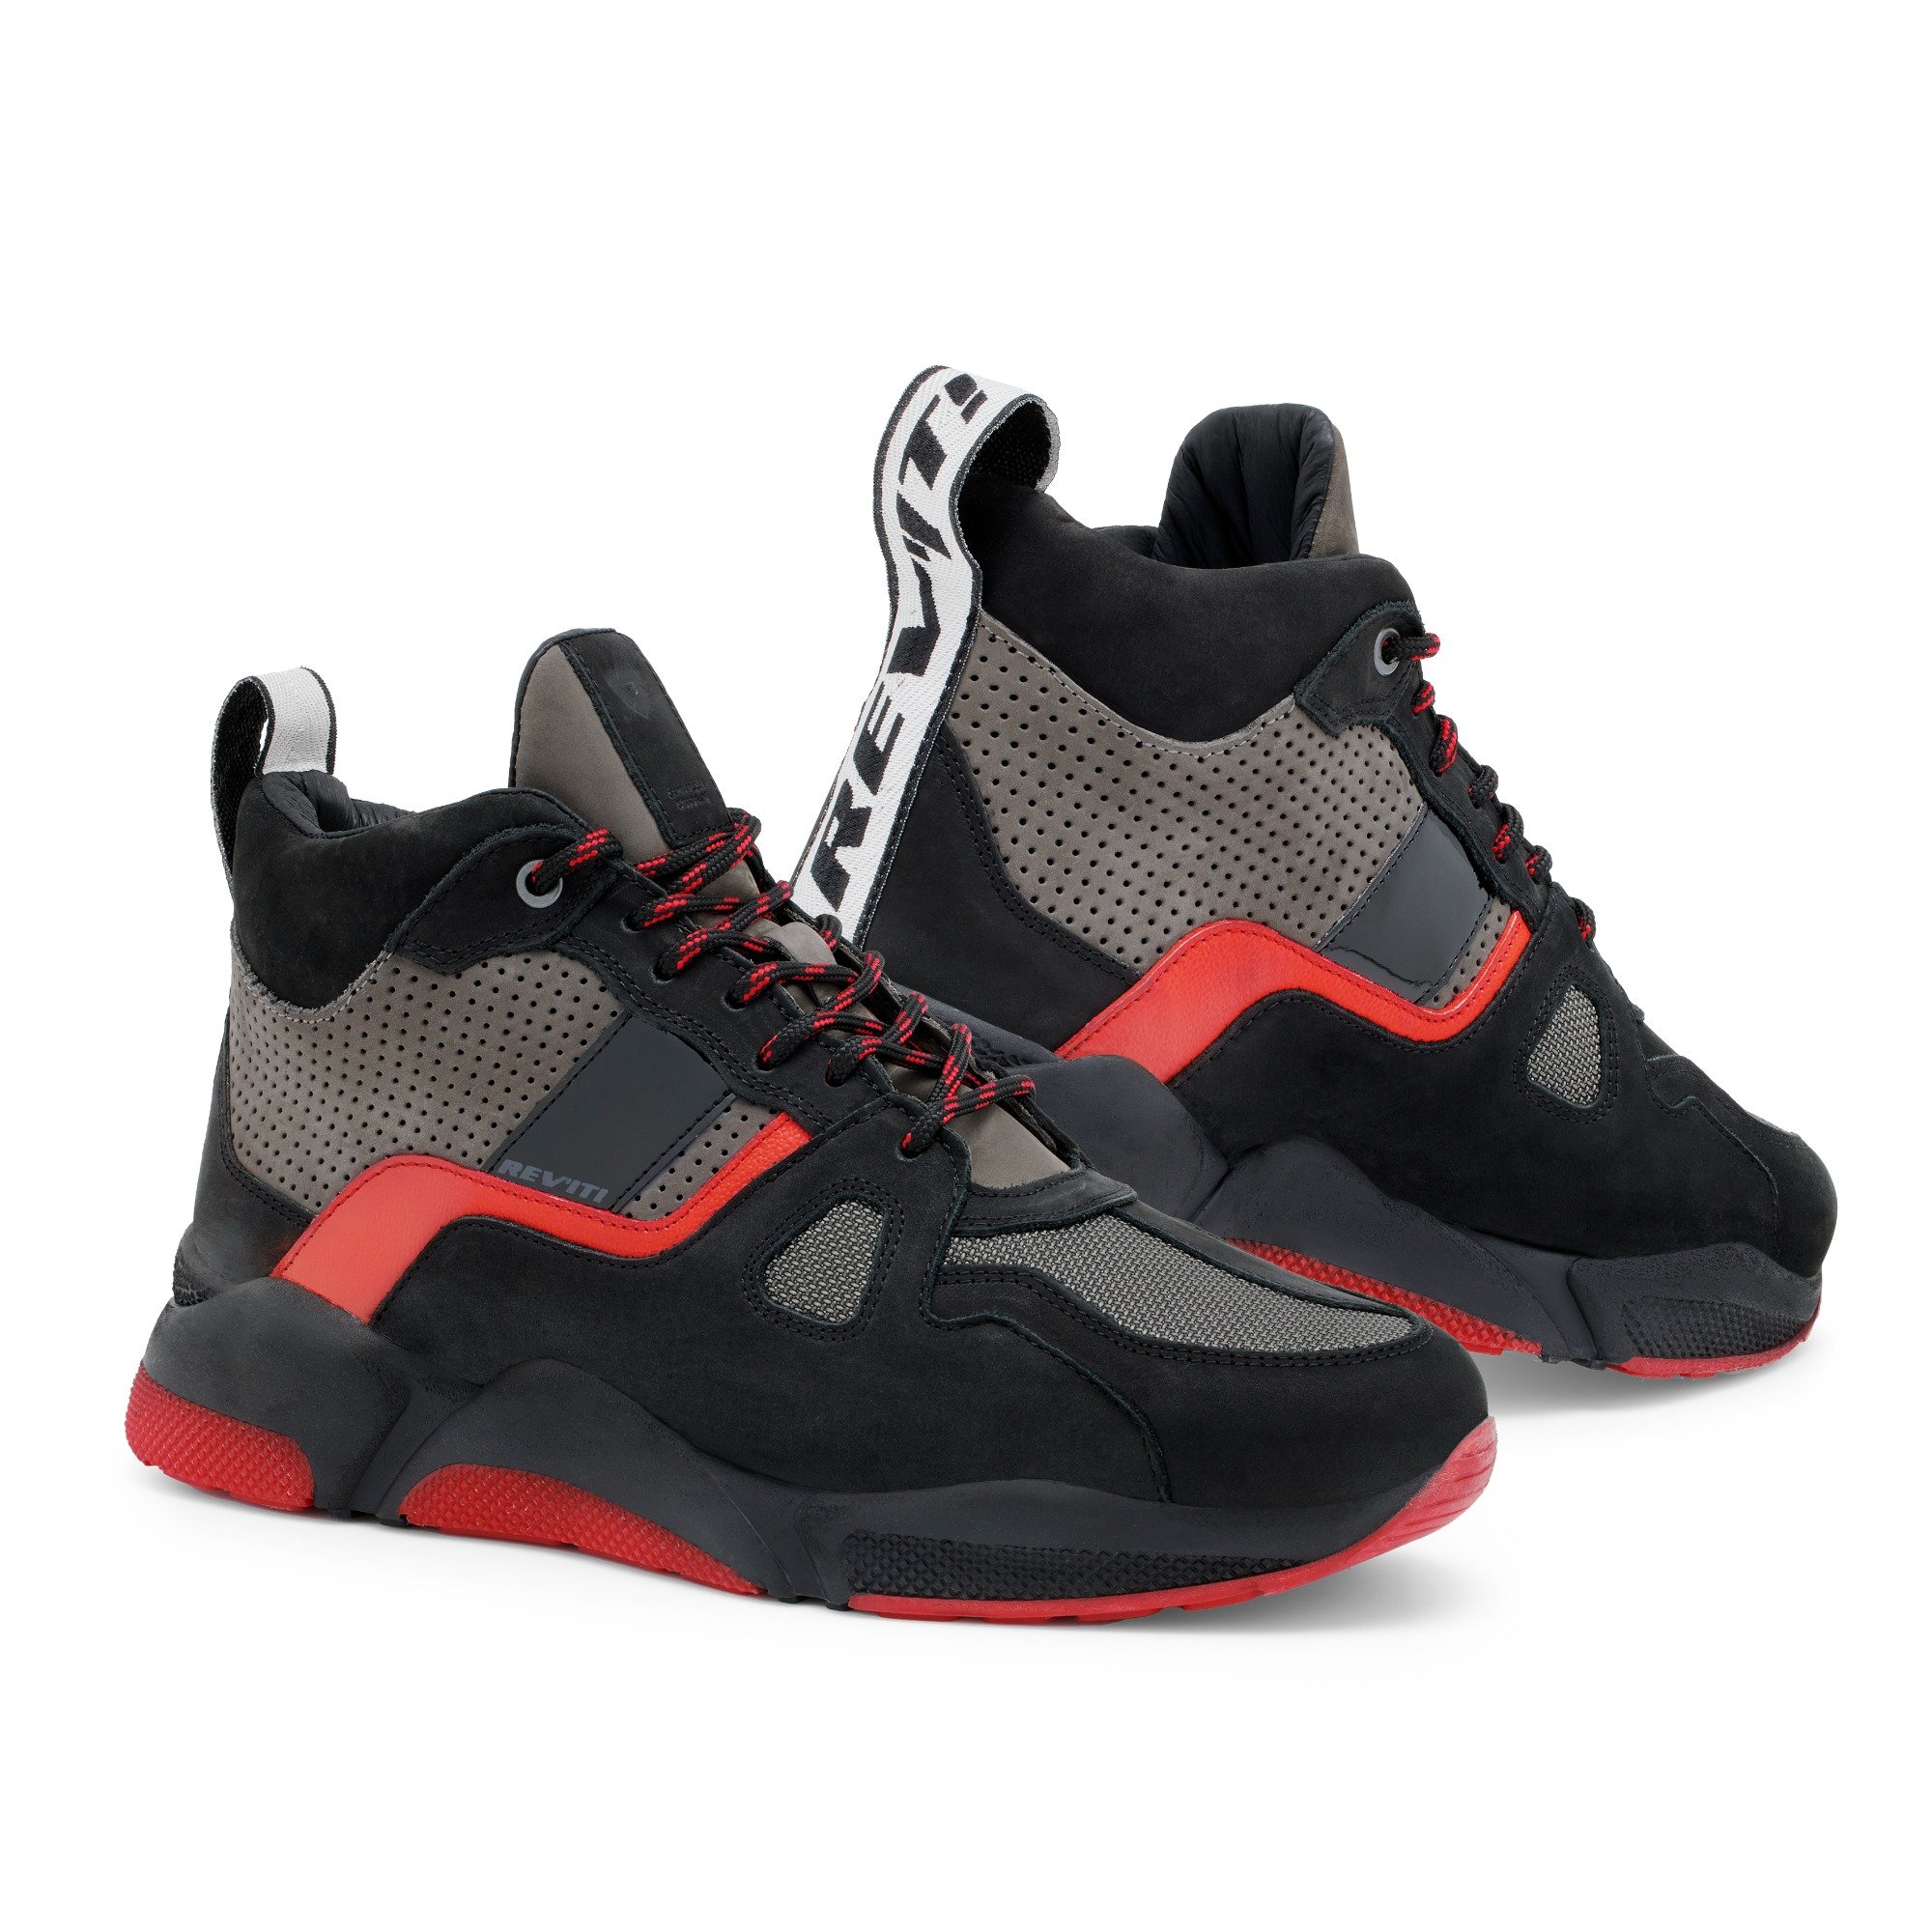 Image of EU REV'IT! Astro Noir Rouge Chaussures Taille 40